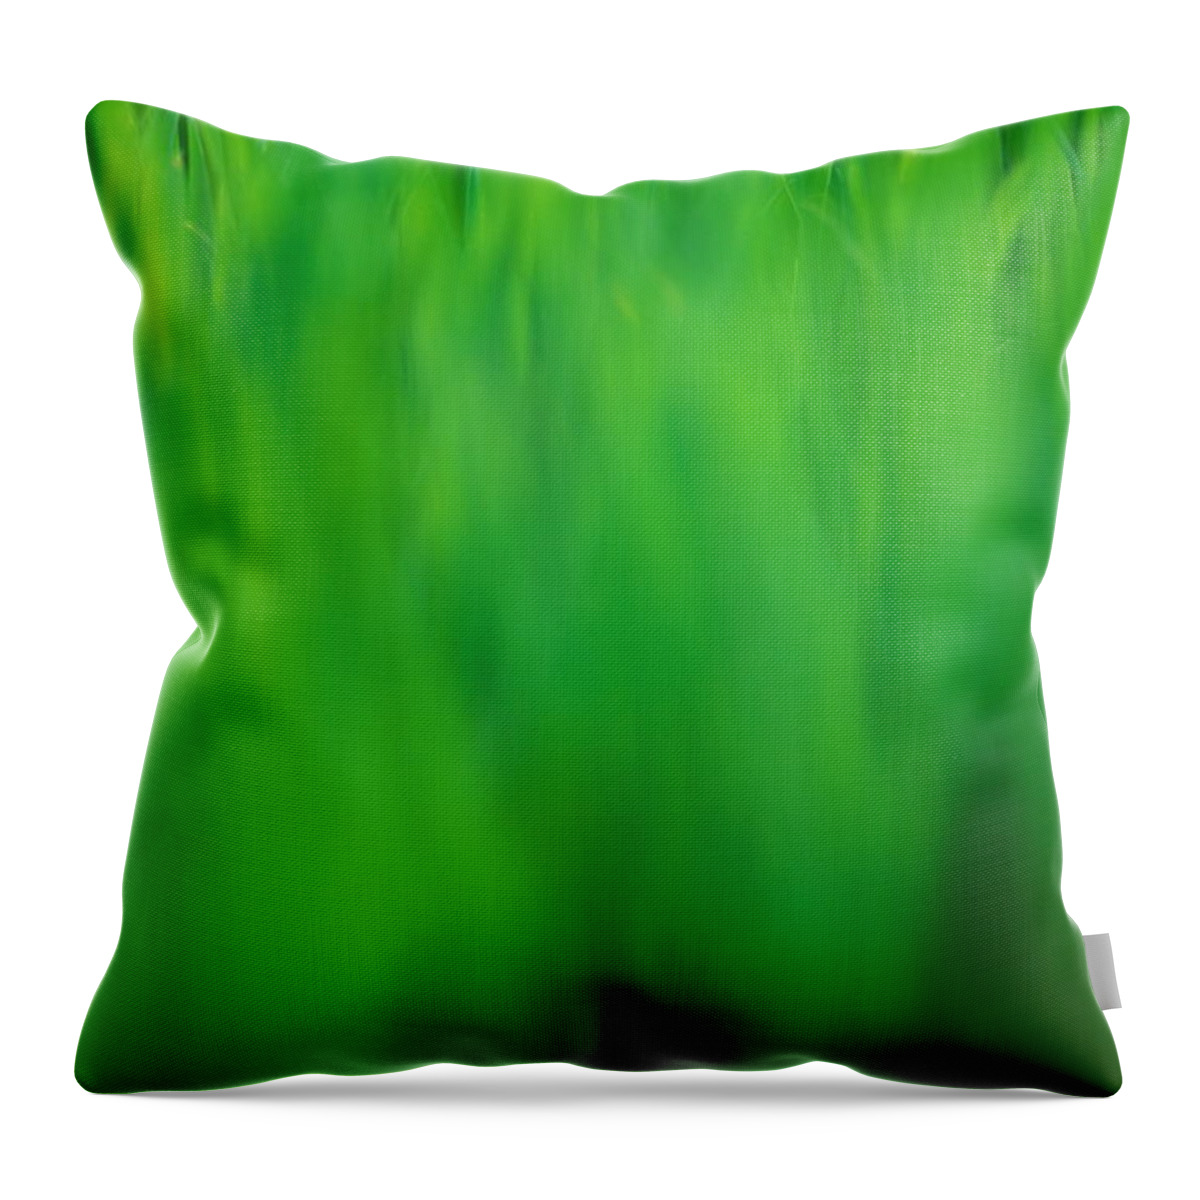 Grass Throw Pillow featuring the photograph Grass, Close-up Defocussed by Jason Hawkes